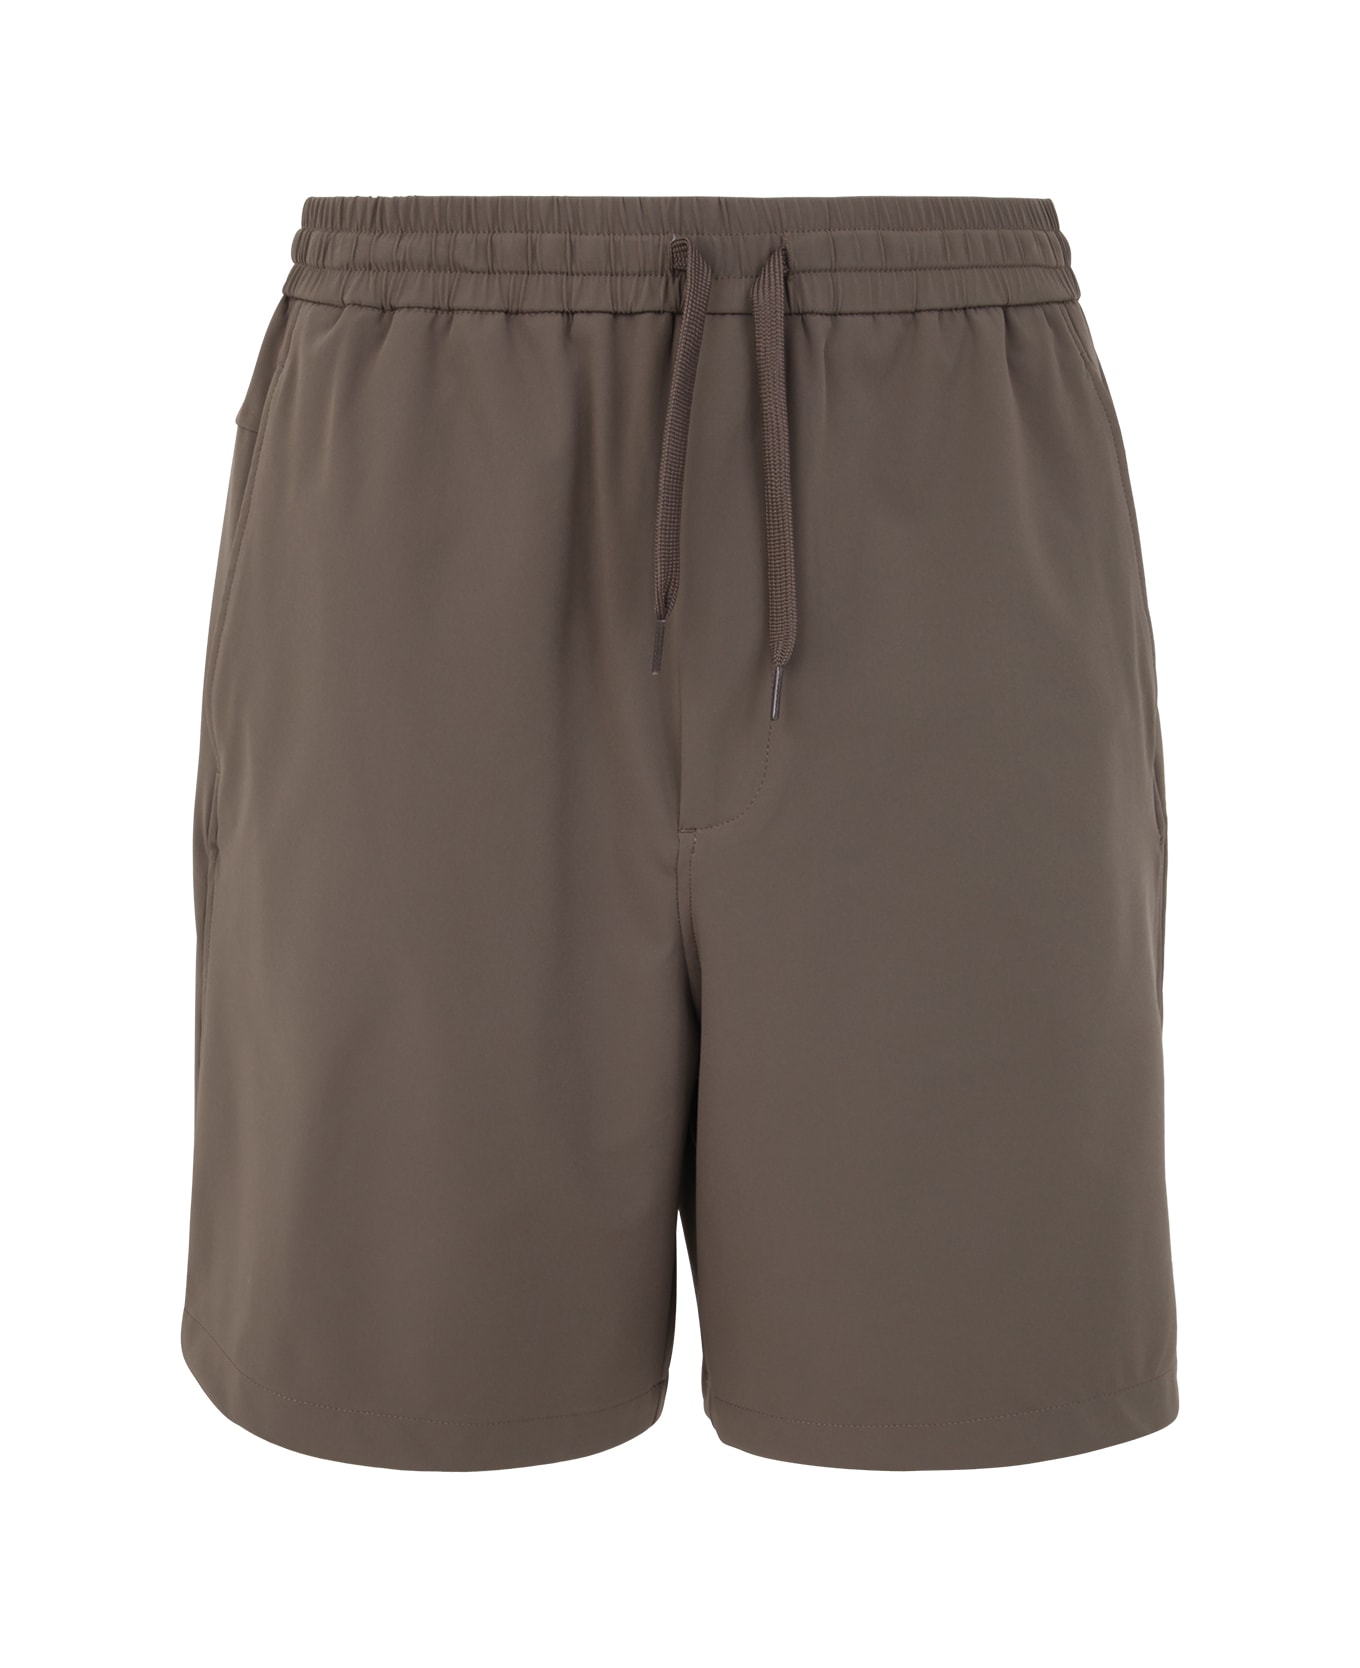 Emporio Armani Knitted Shorts - Mud